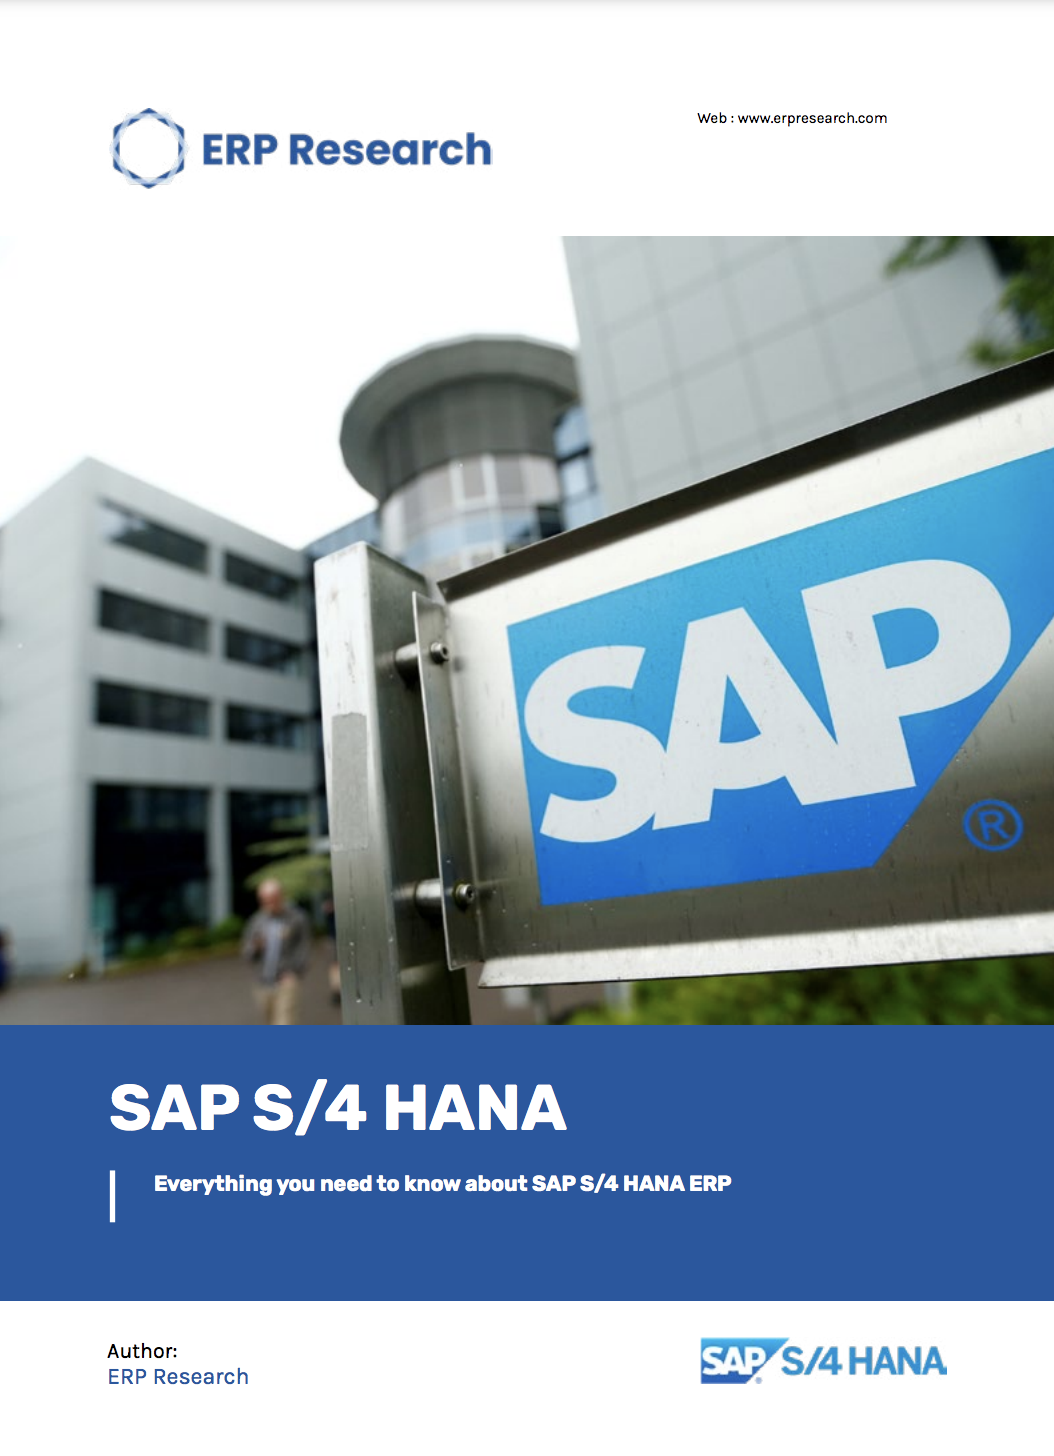 Sap -what you need to know